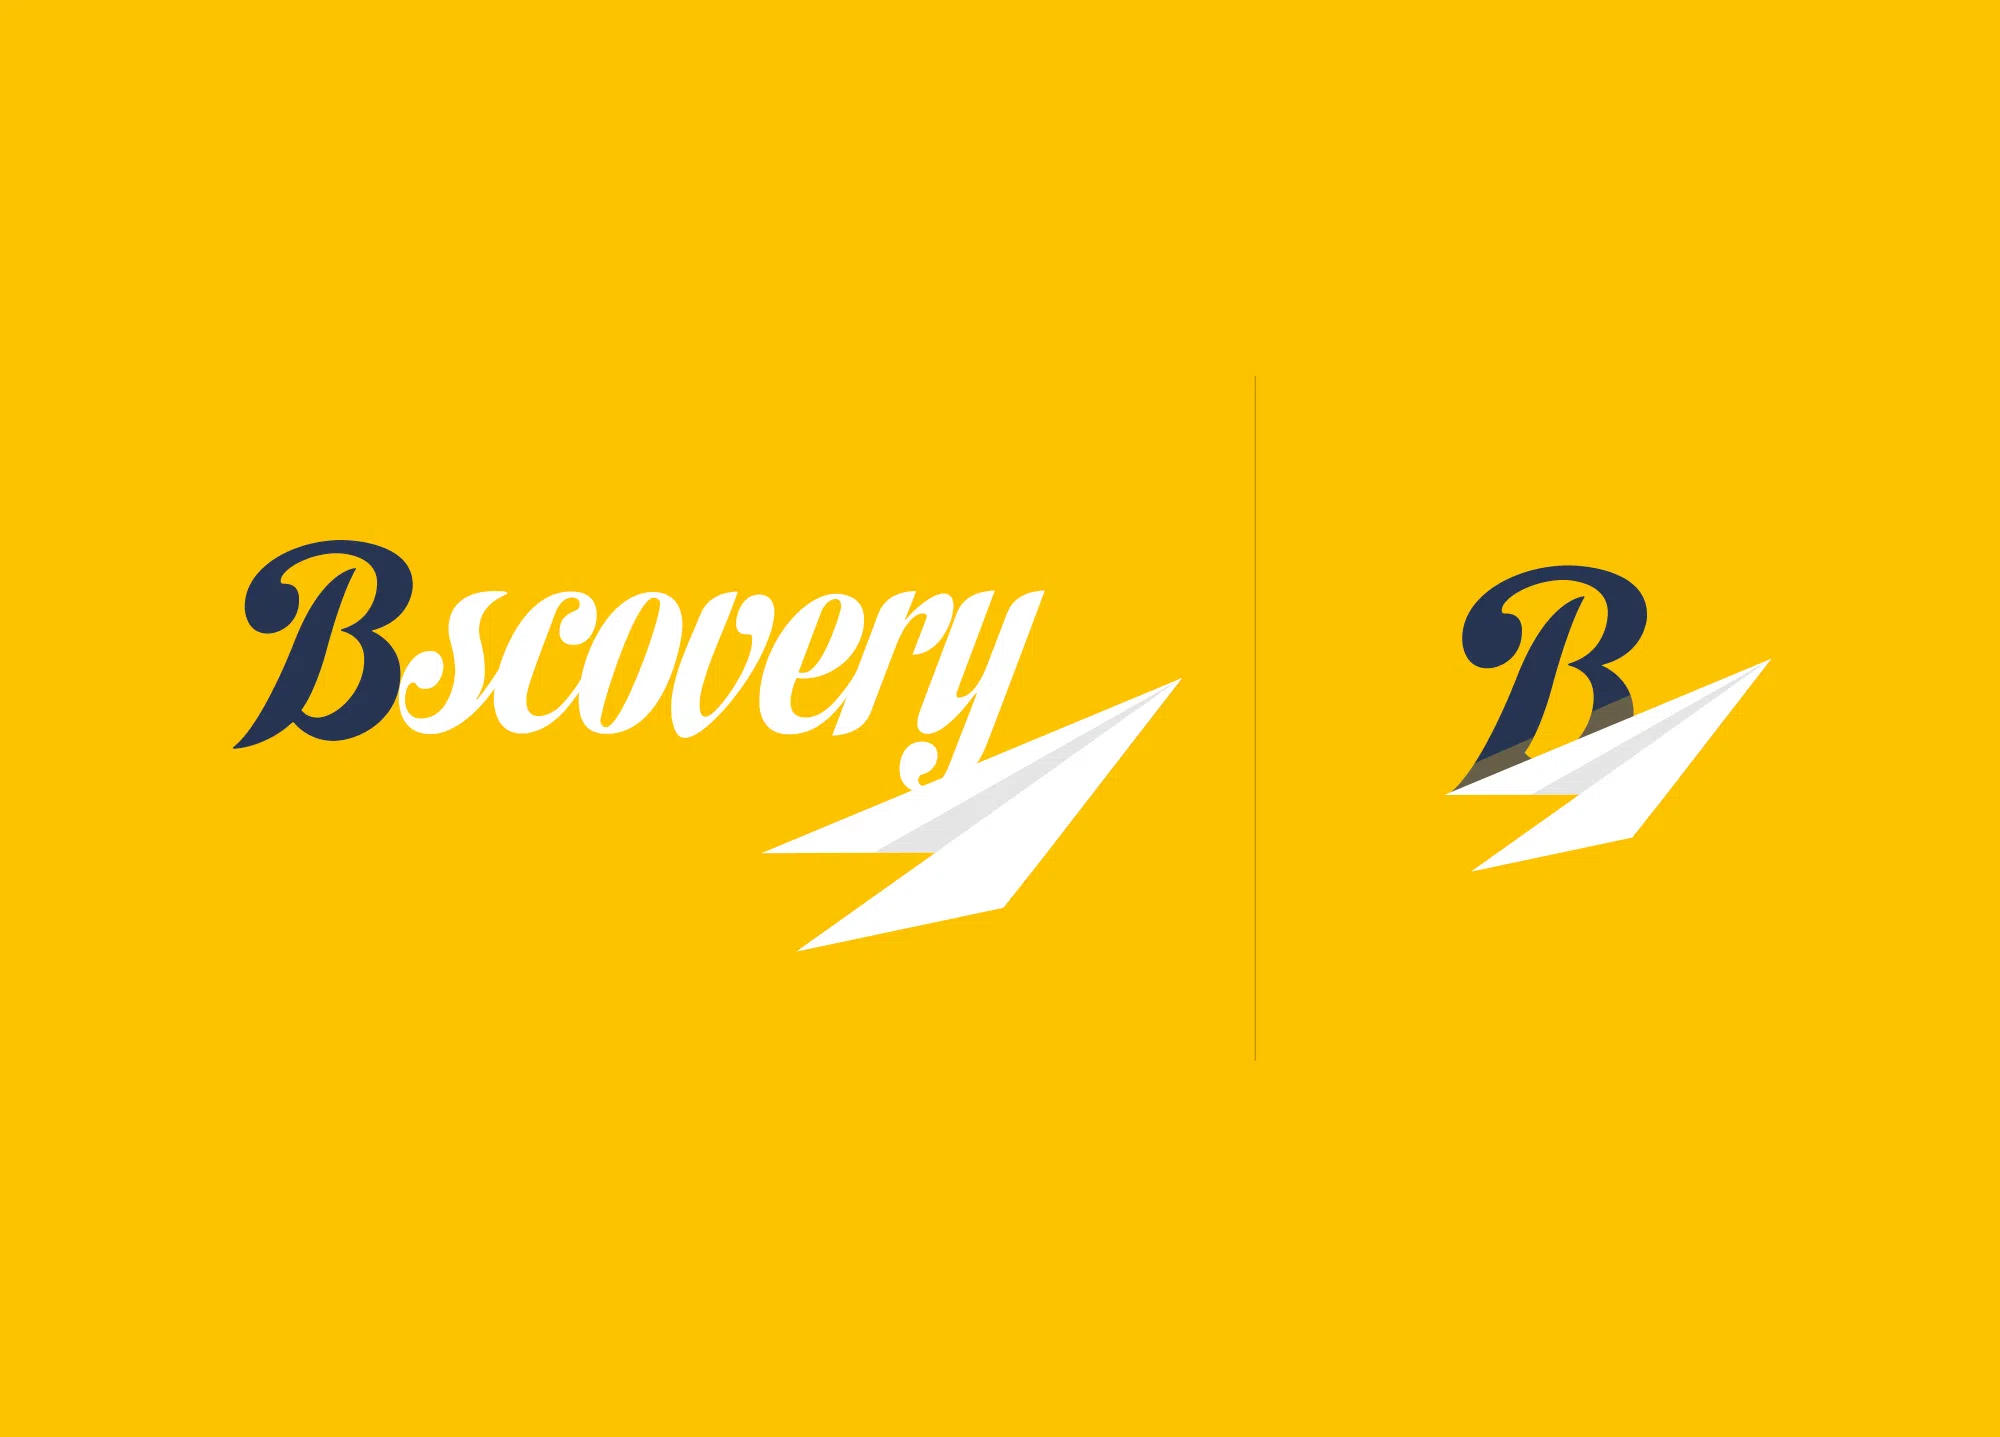 Logo bscovery